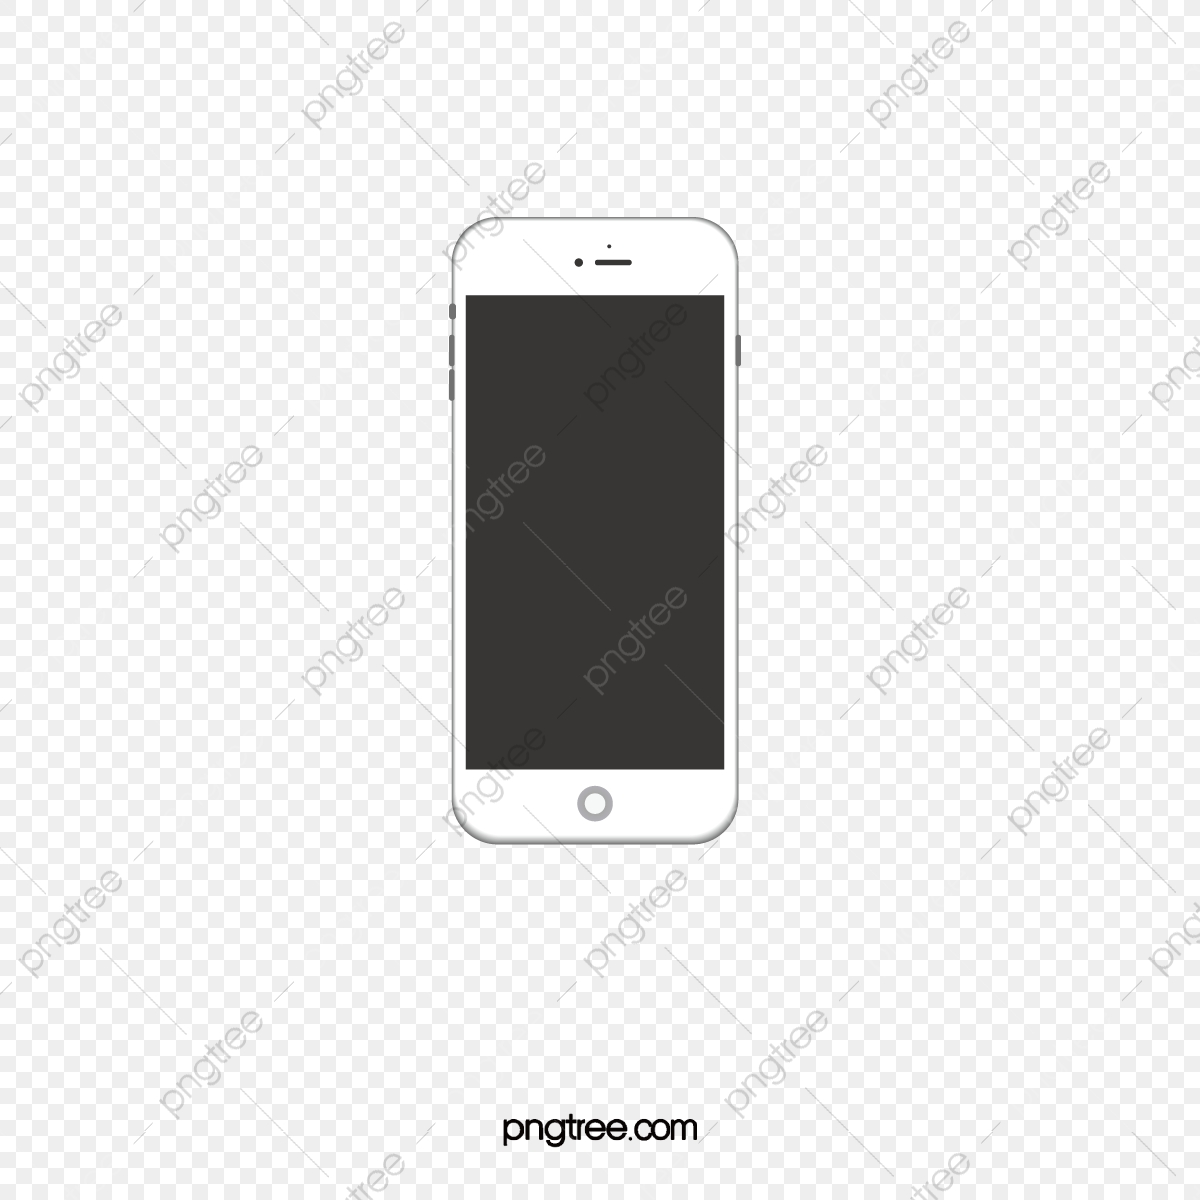 iphone clipart copyright free